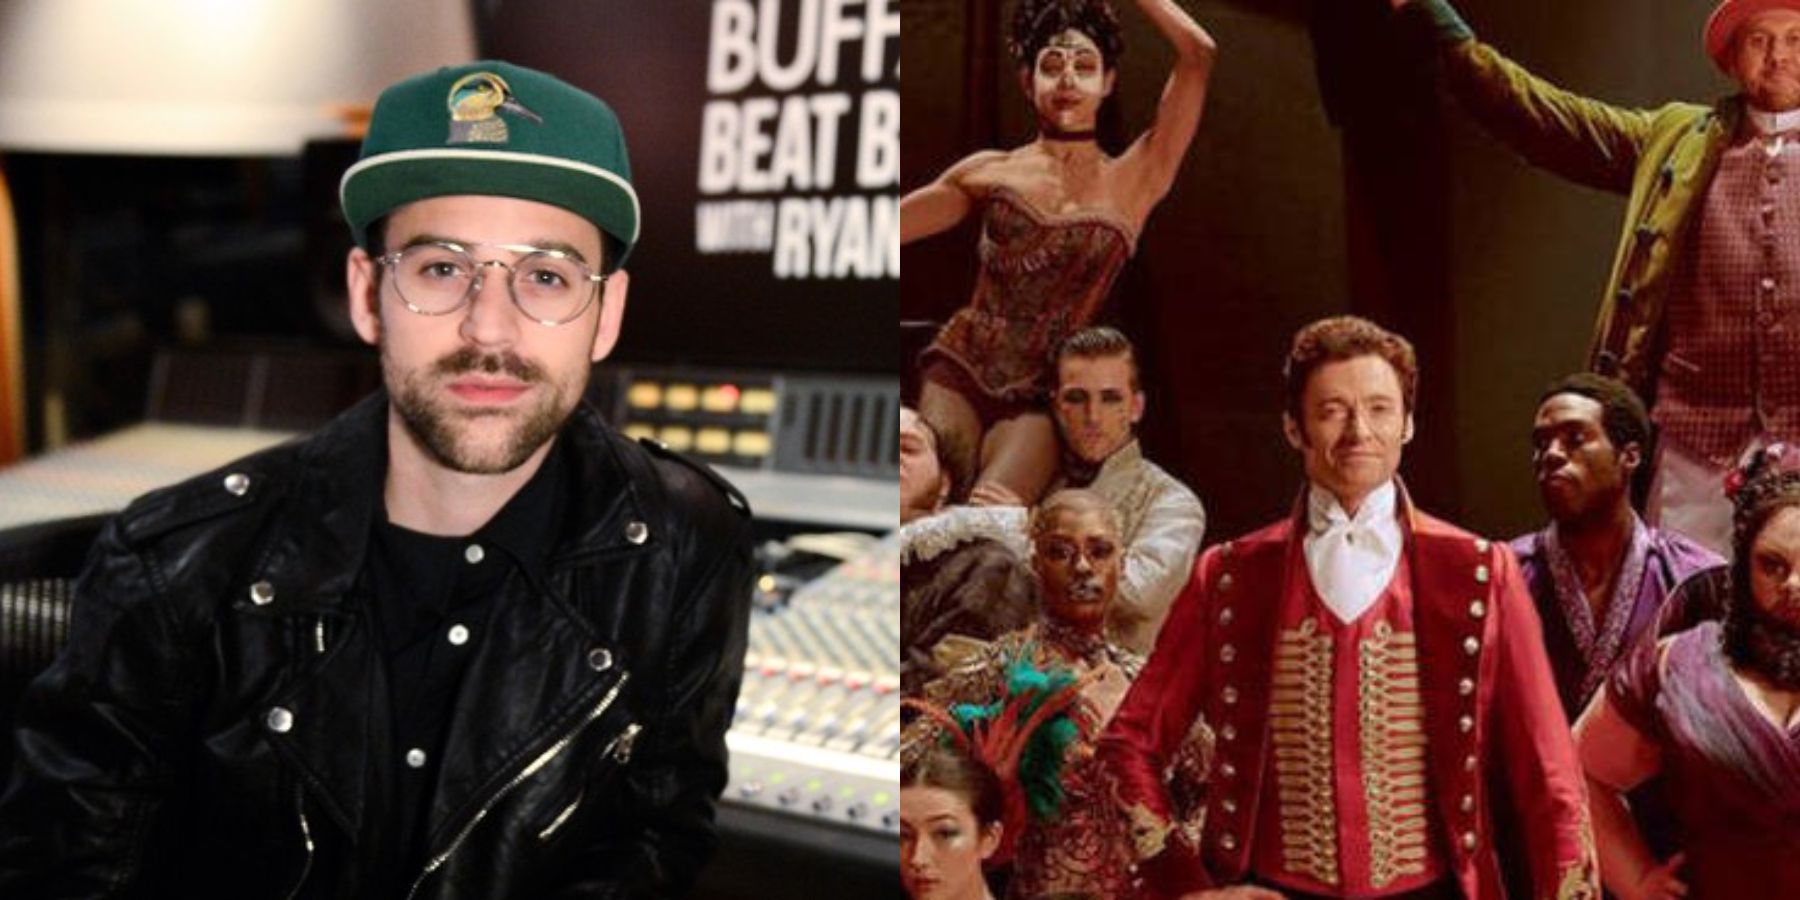 Ryan Lewis on The Greatest Showman's soundtrack